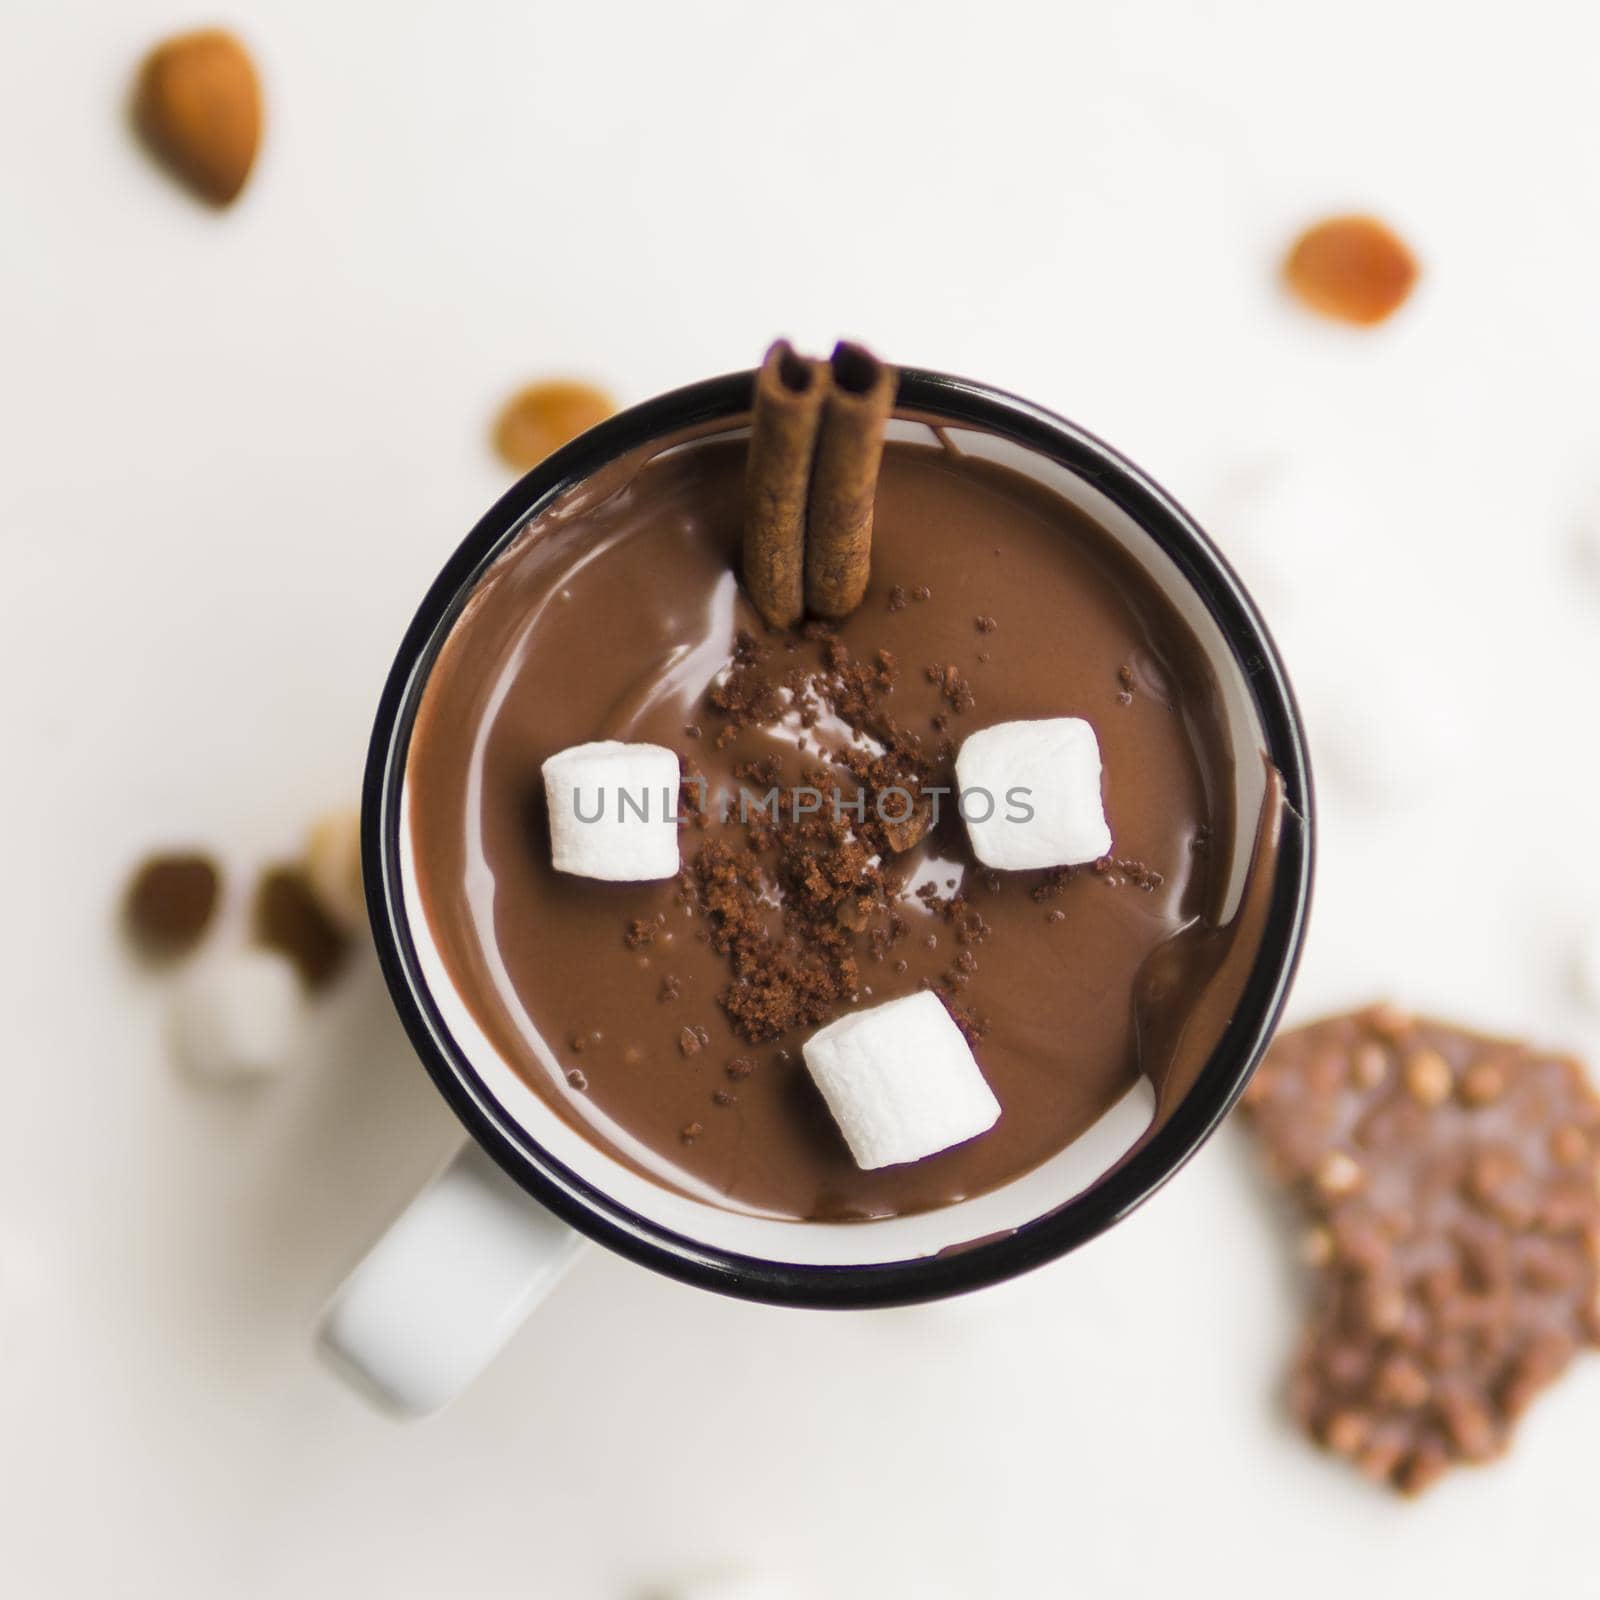 hot chocolate with tubules marshmallow by Zahard